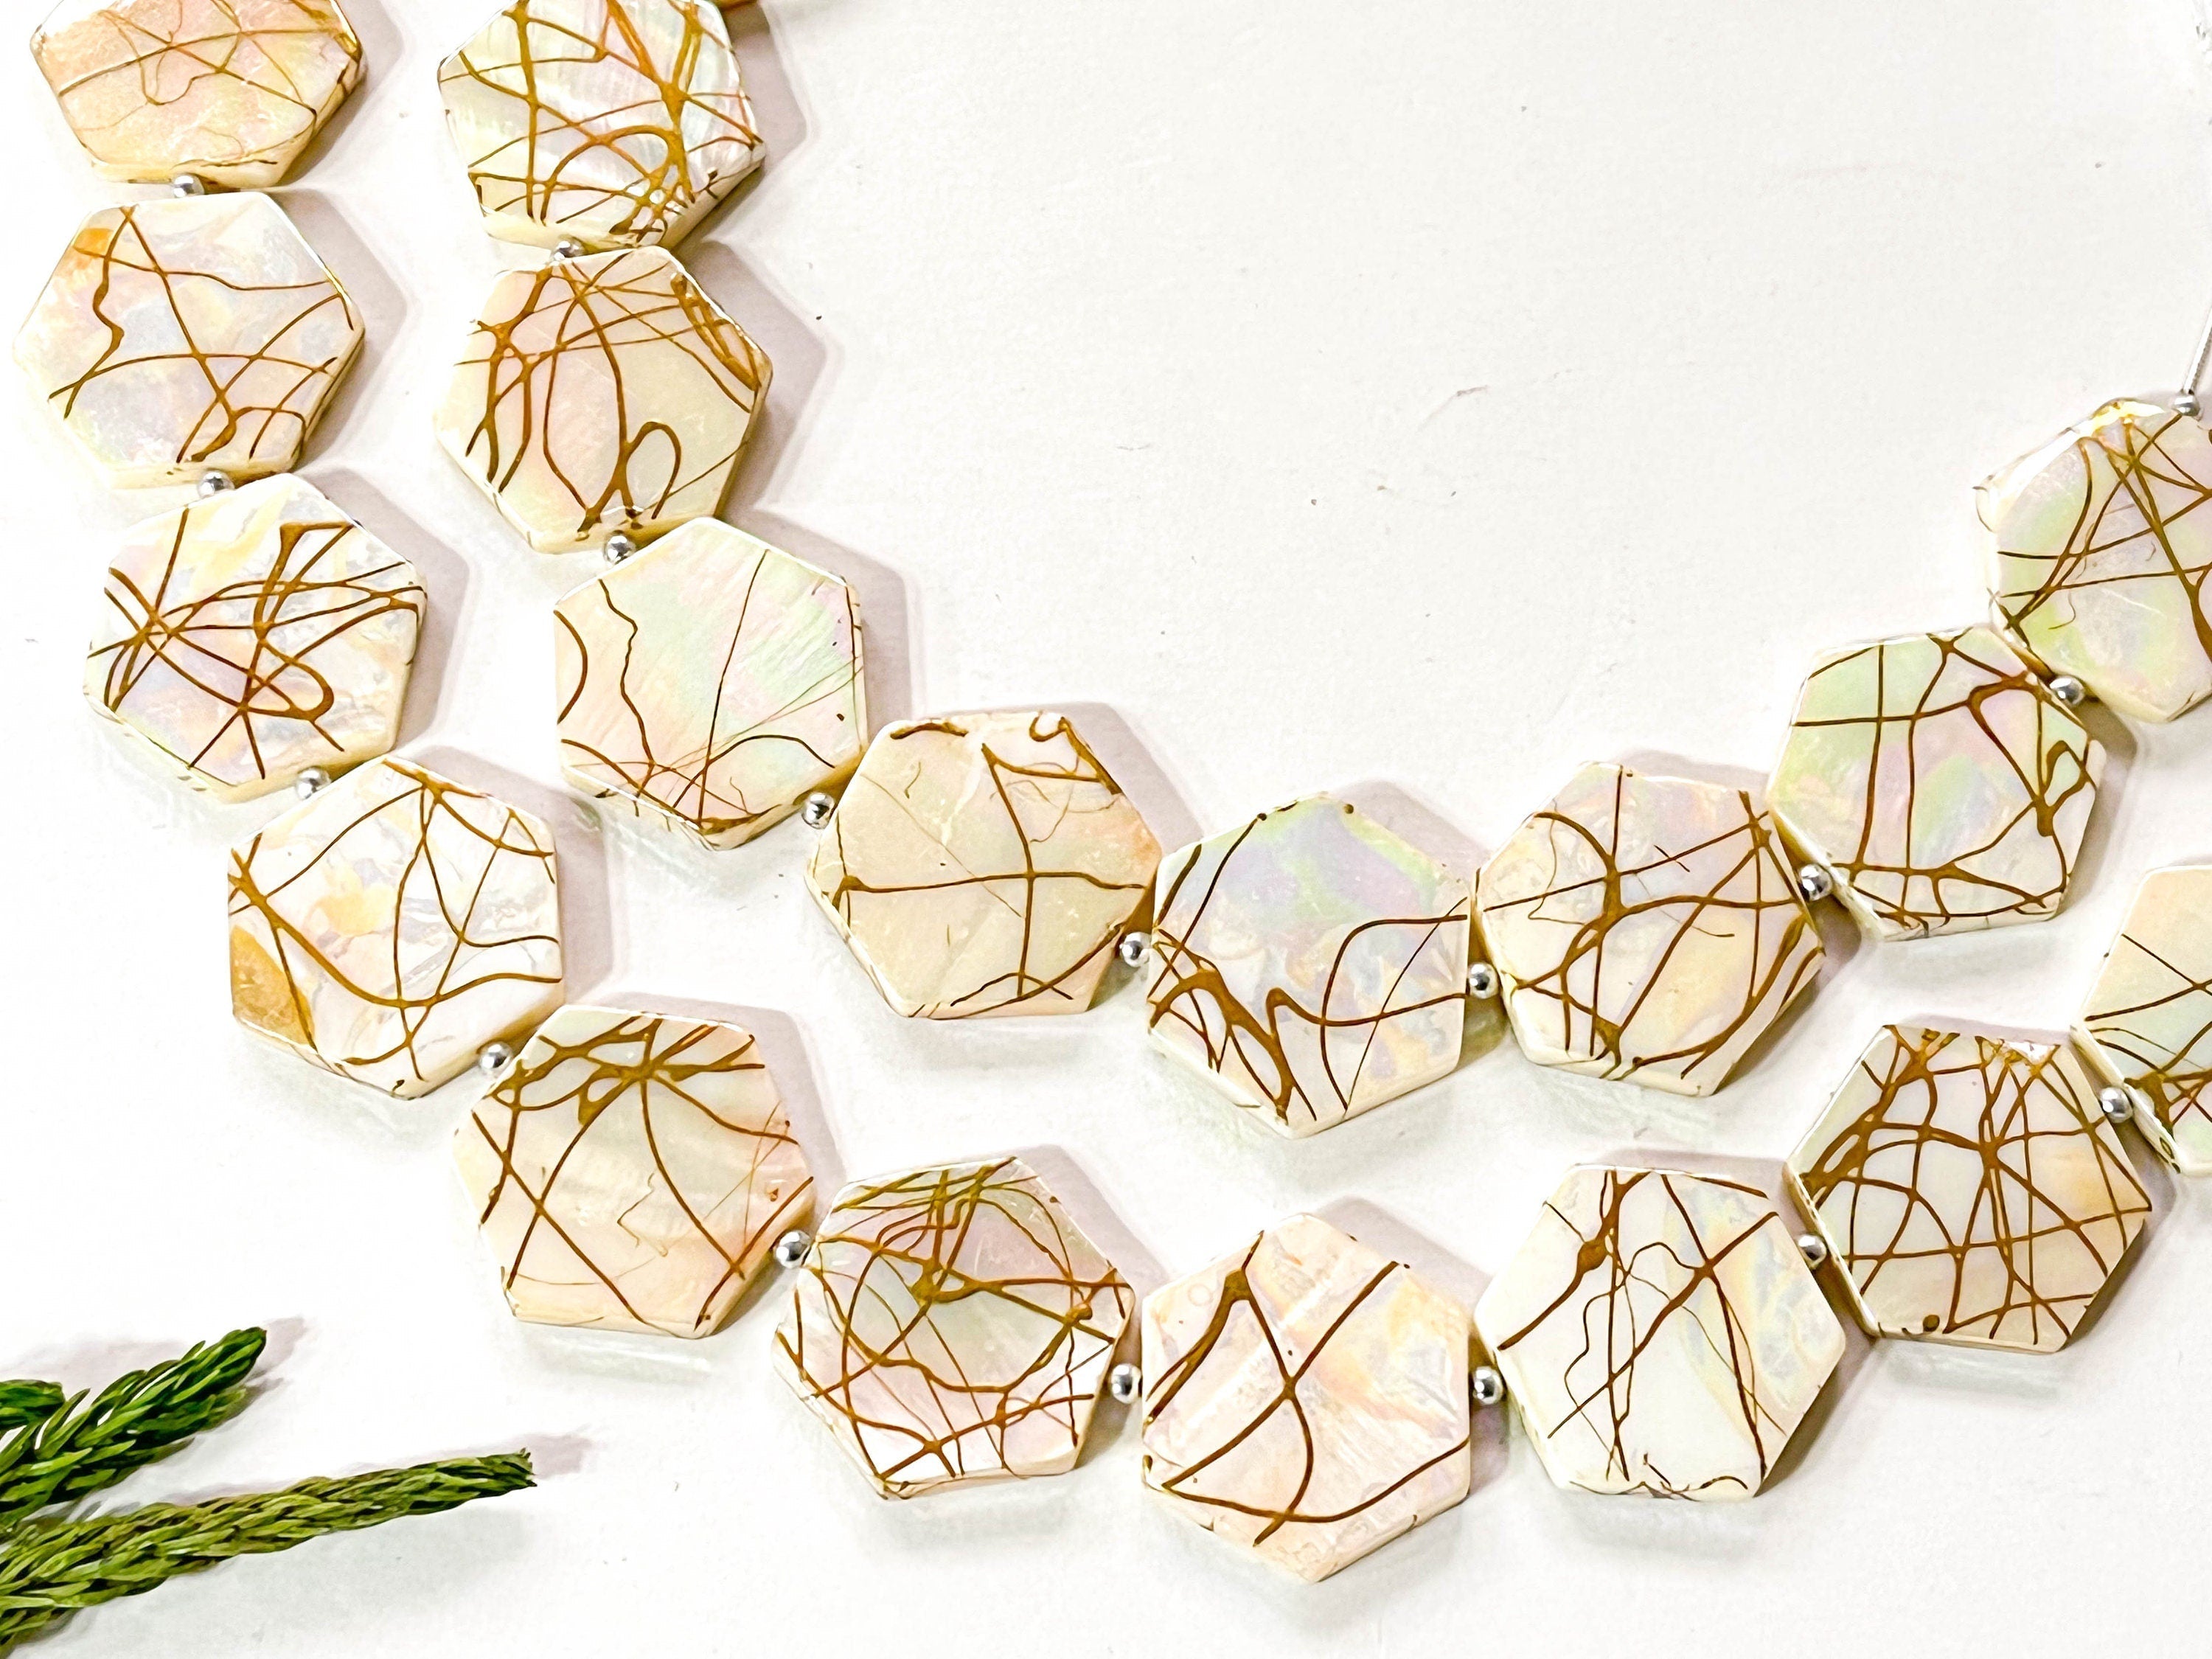 Natural Mother of Pearl with Gold Color Coating Beads | Hexagon Shape | 20x20mm | 10 Pieces | 8 Inches | Beadsforyourjewellery Beadsforyourjewelry